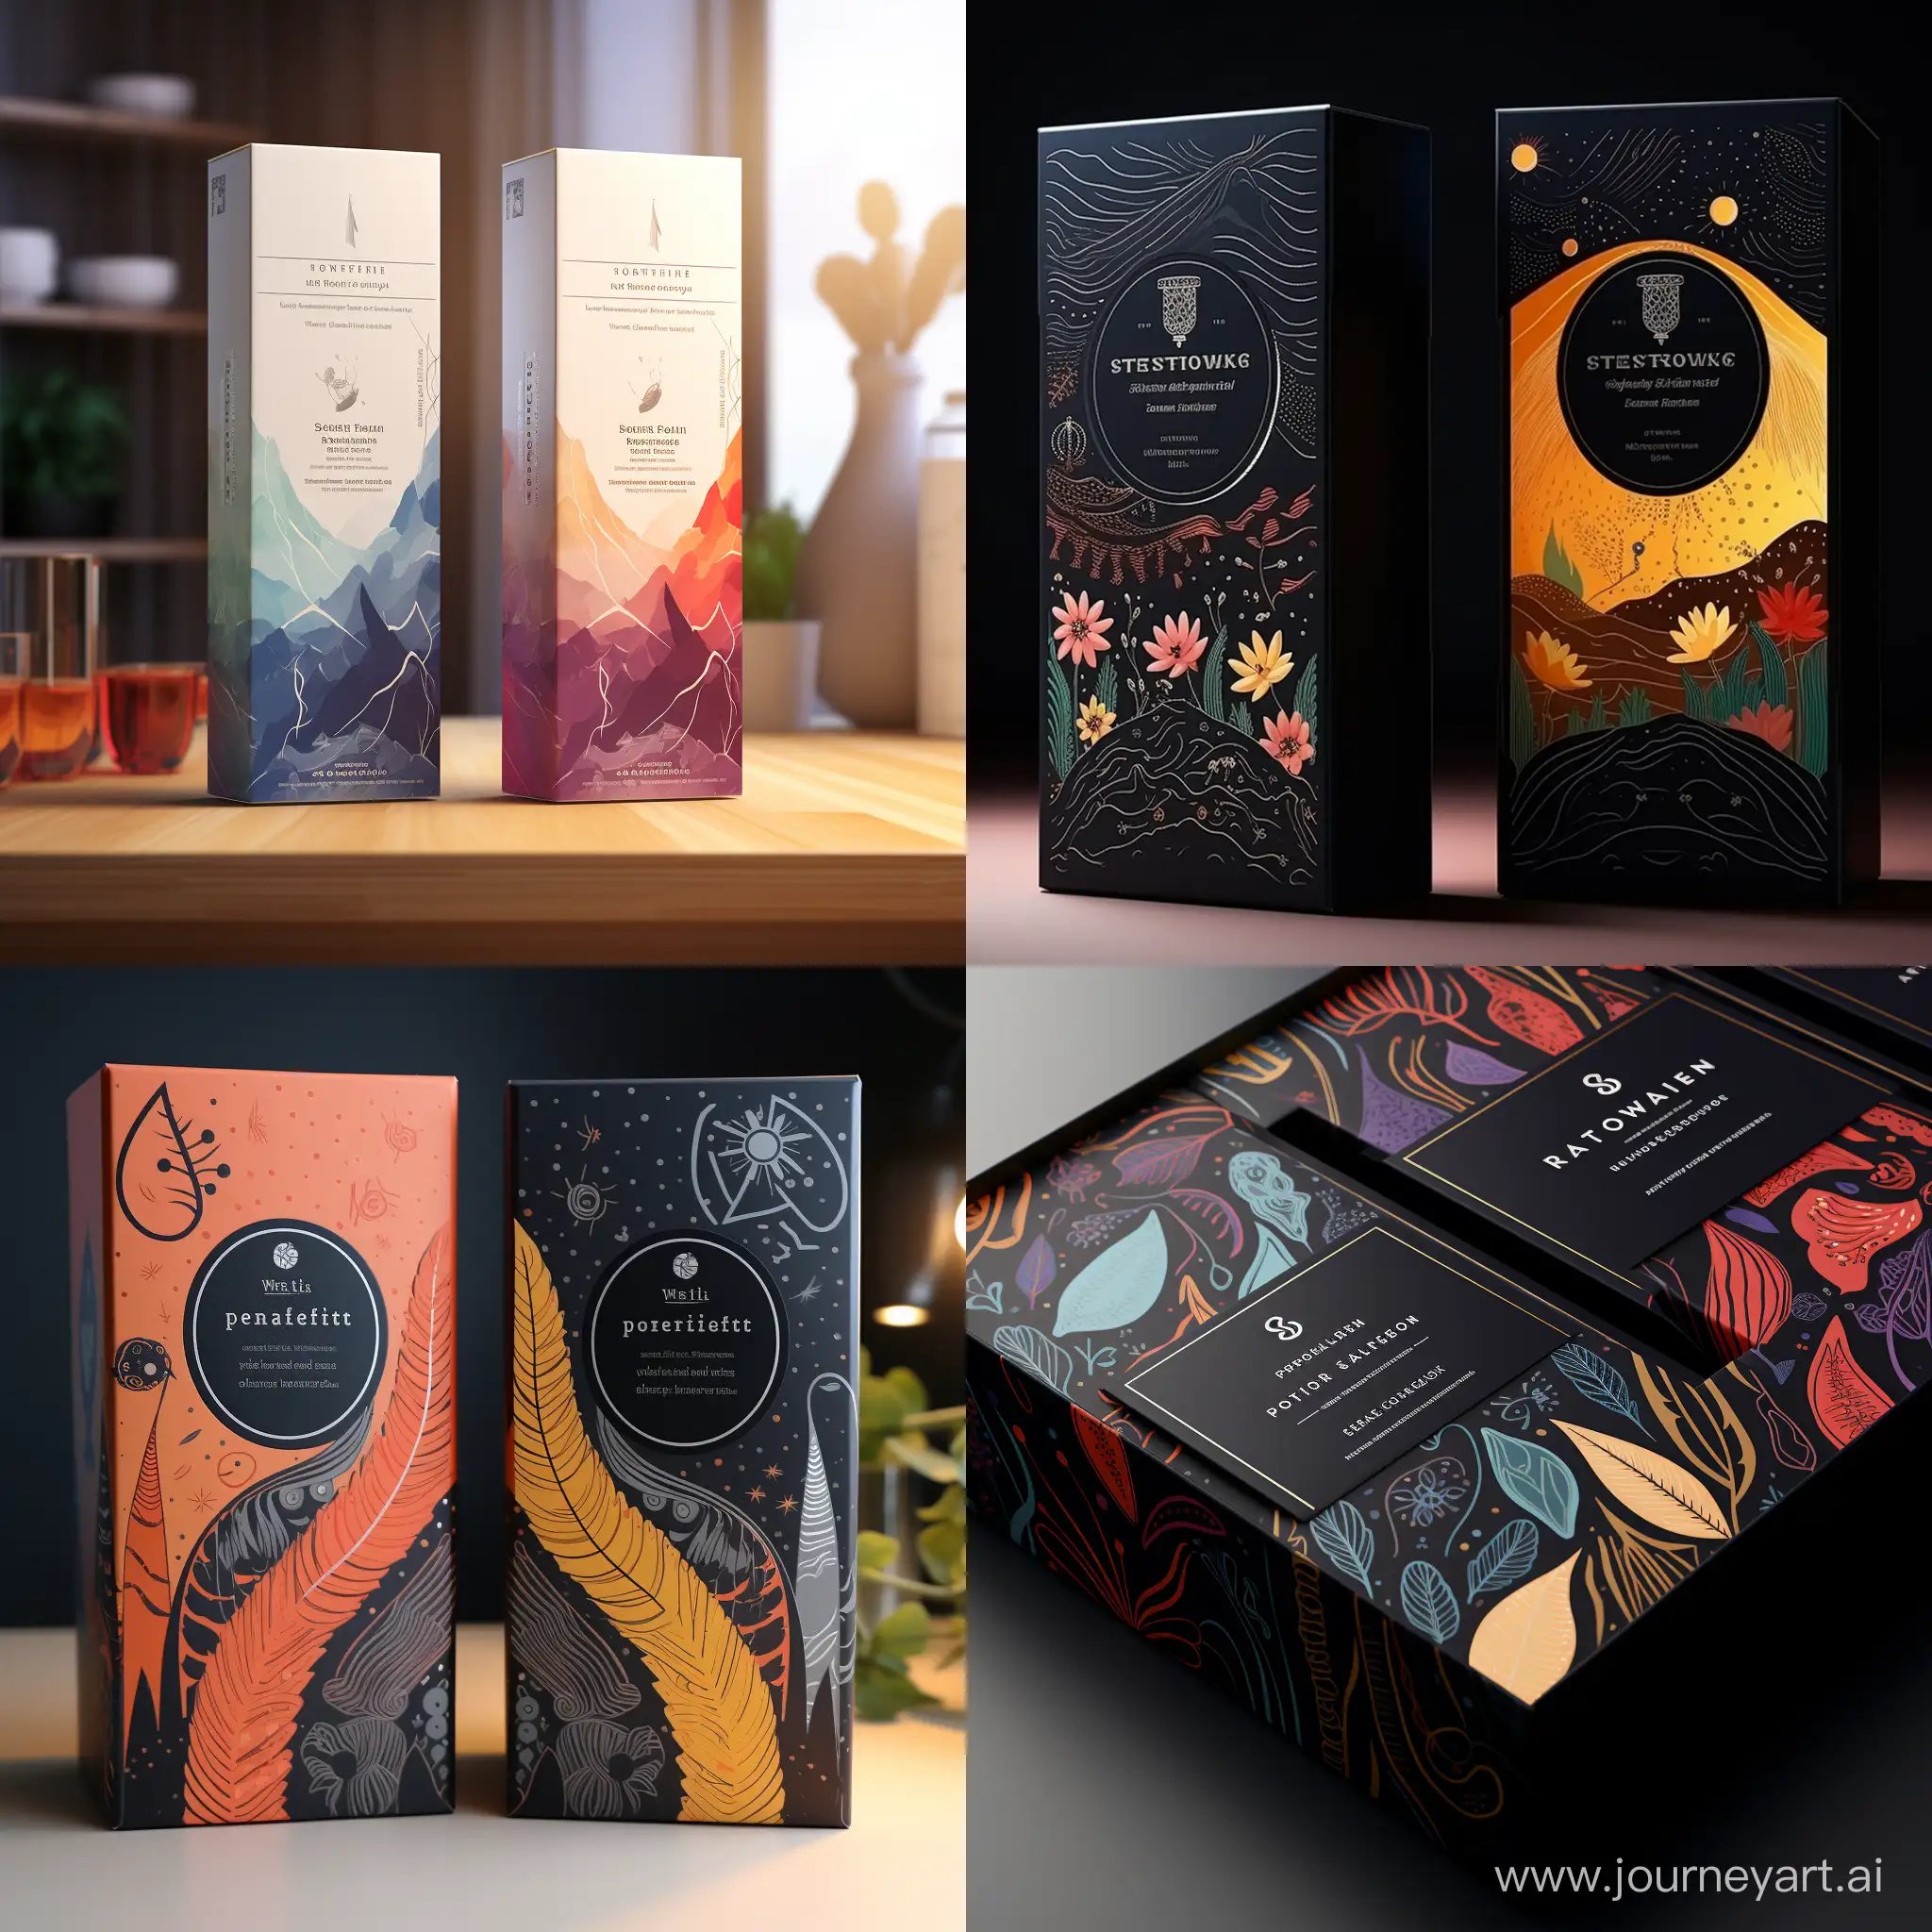 Creative-11-Aspect-Ratio-Product-Packaging-Design-Concept-No-34220